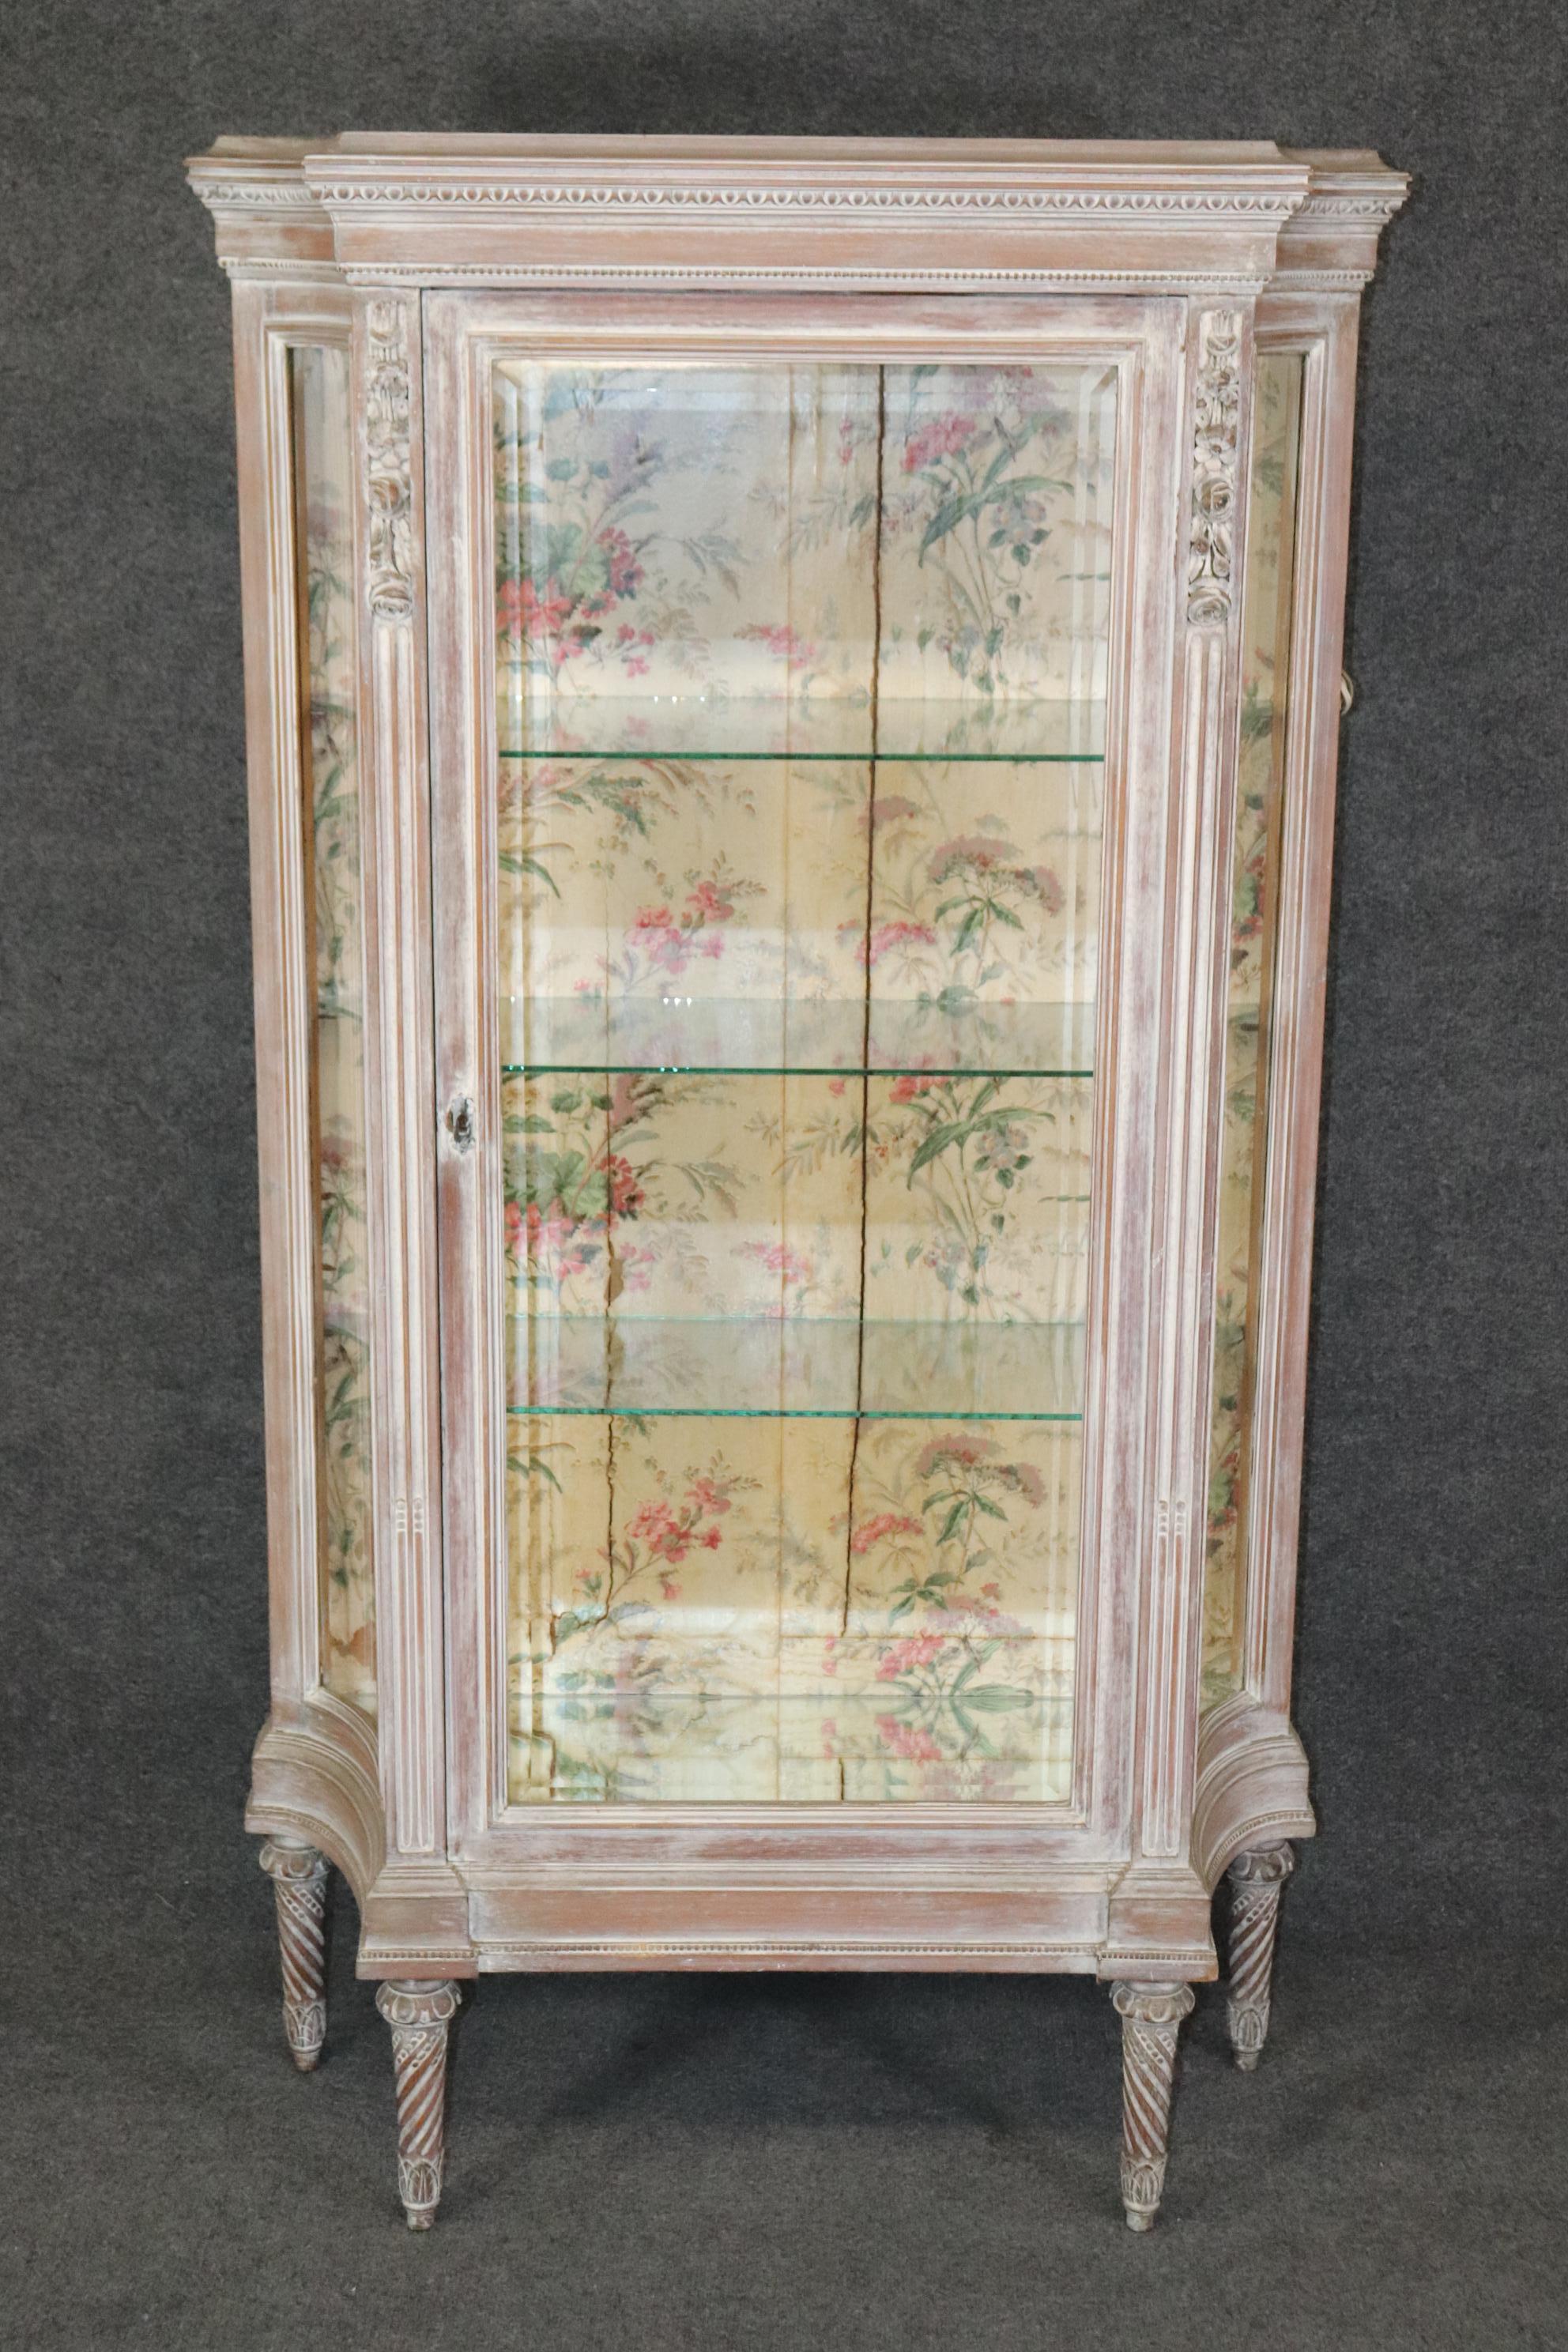 Dimensions- H: 66 3/4in W: 38in D: 13 3/4in 
 This Antique Distressed French Louis XVI Style Curio Cabinet, China Cabinet is made of the highest quality and has a beautiful distressed finish/patina to it! If you look at the photos provided you'll